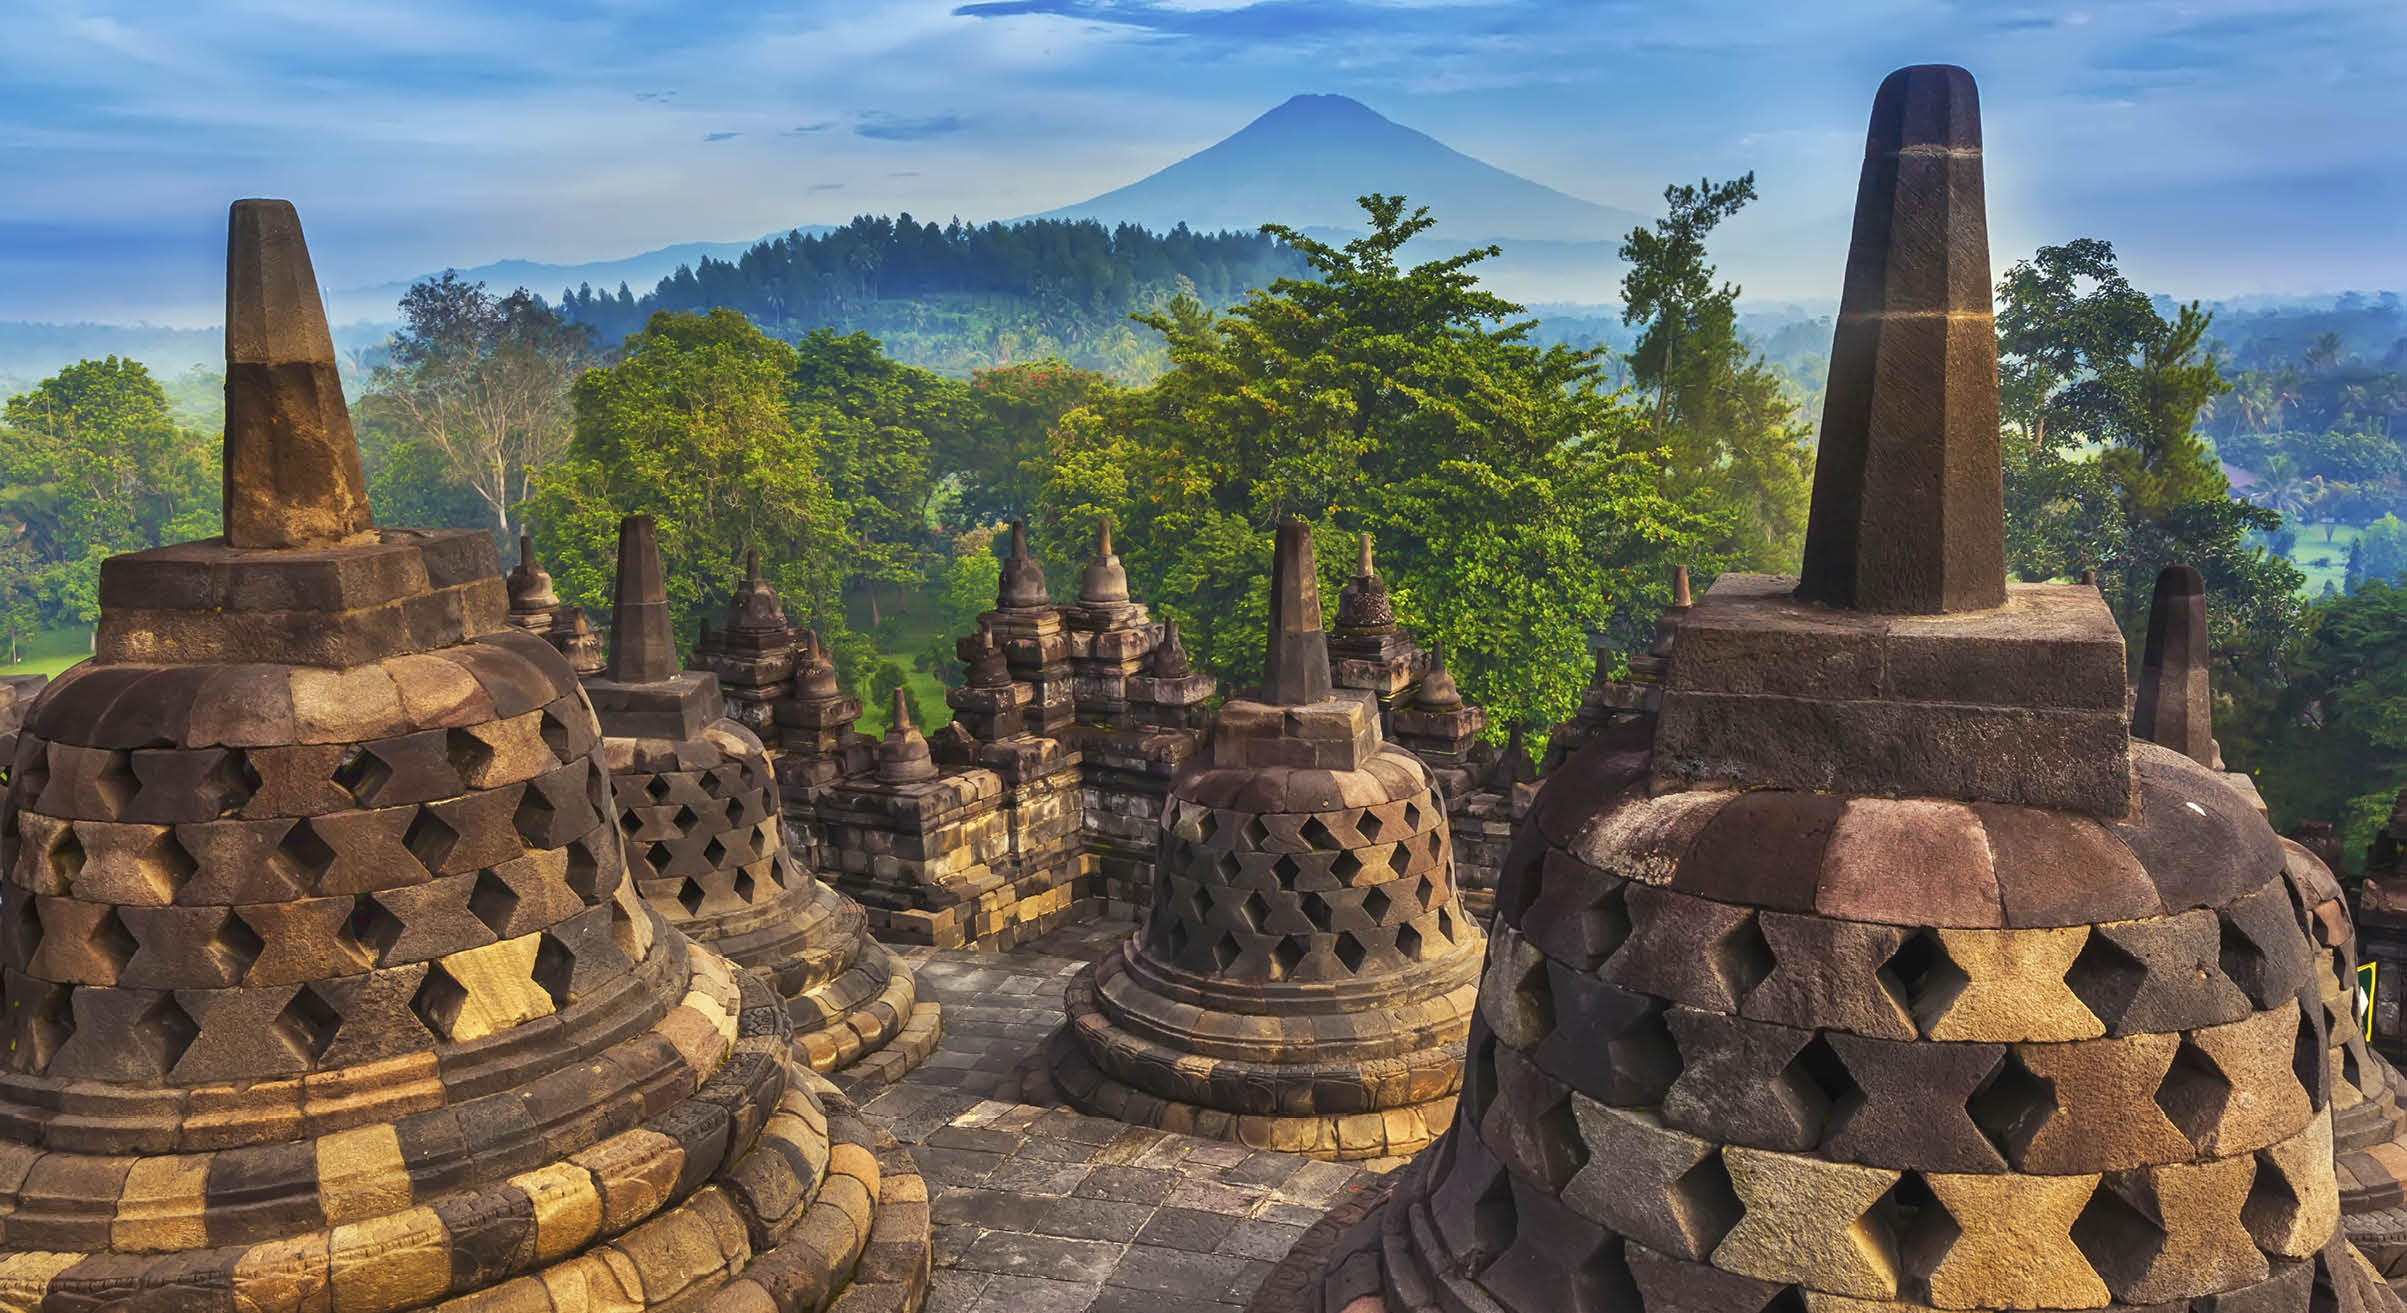 Candi Borobudur in the background of rainforest, morning mist and Sumbing Mountain.